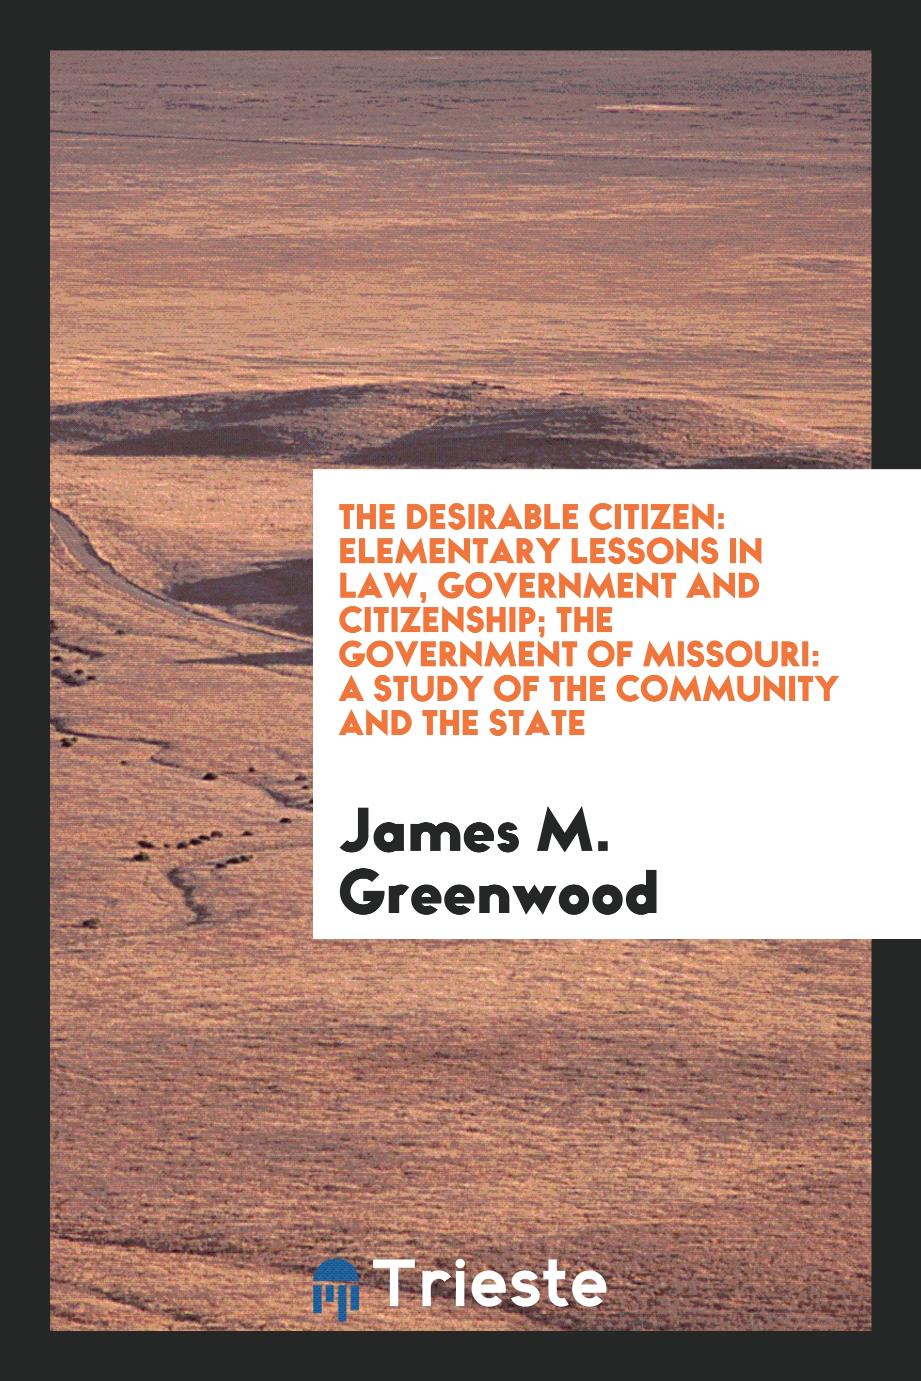 James M. Greenwood - The Desirable Citizen: Elementary Lessons in Law, Government and Citizenship; The Government of Missouri: A Study of the Community and the State